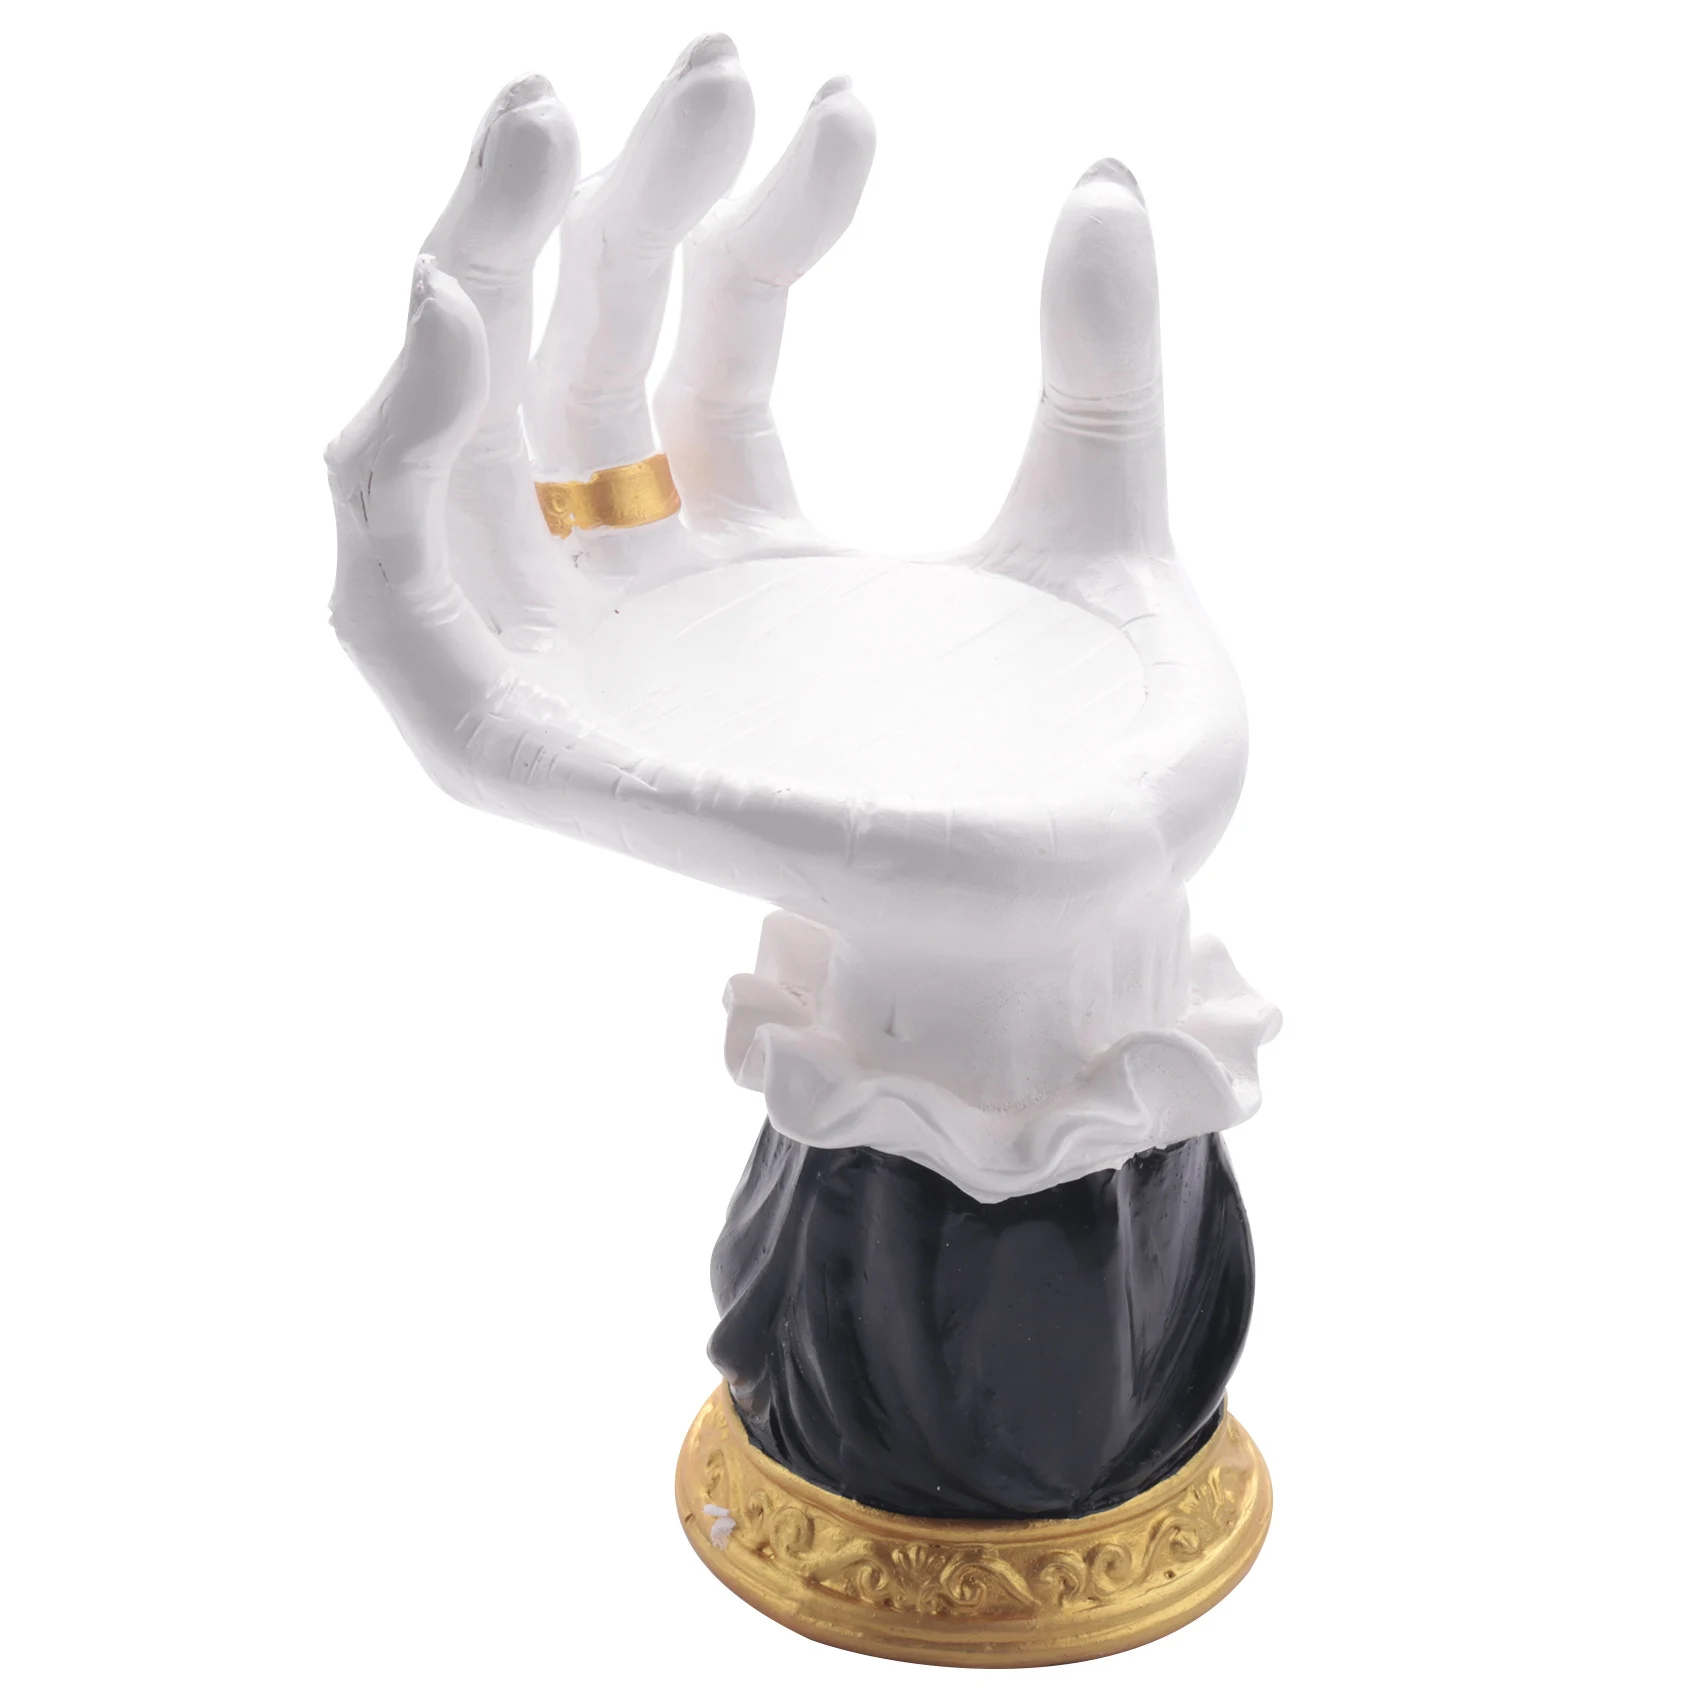 

Witch Hands Candle Pedestal Snack Bowl Stand Resin Desktop Ornament Halloween Candlestick Home and Party Decor